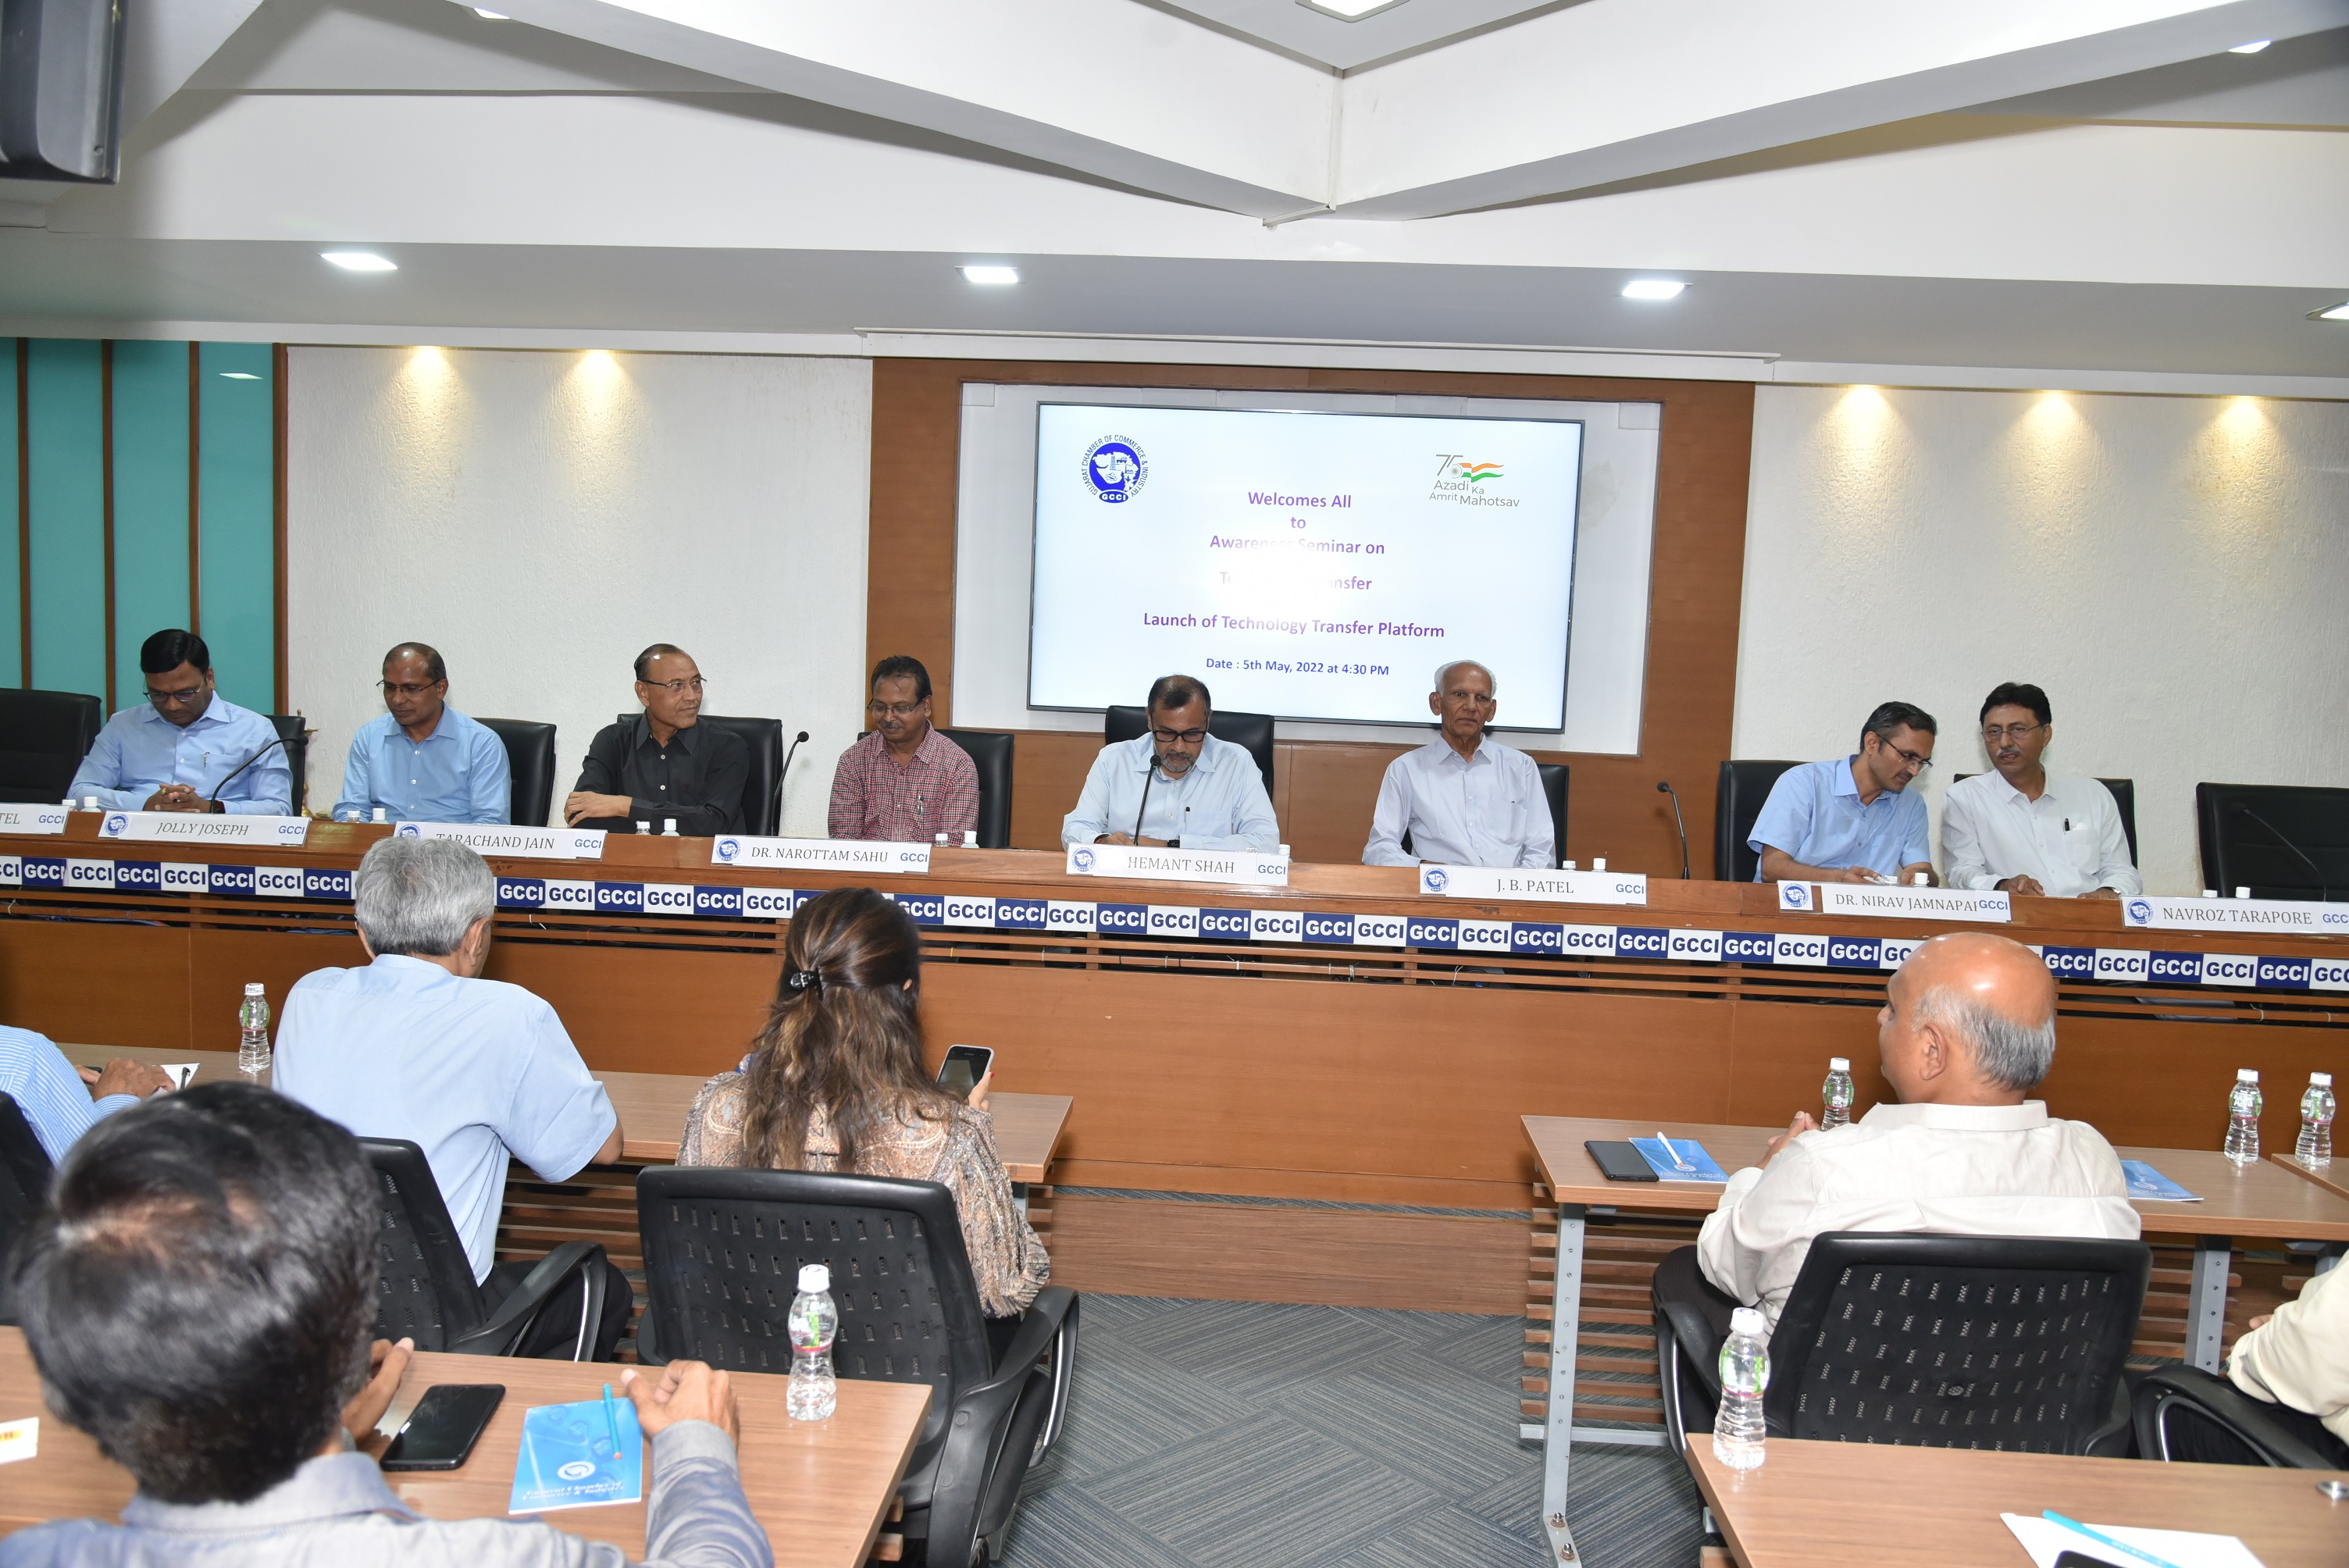 Awareness seminar on Technology Transfer and Launch of Technology Transfer Platform